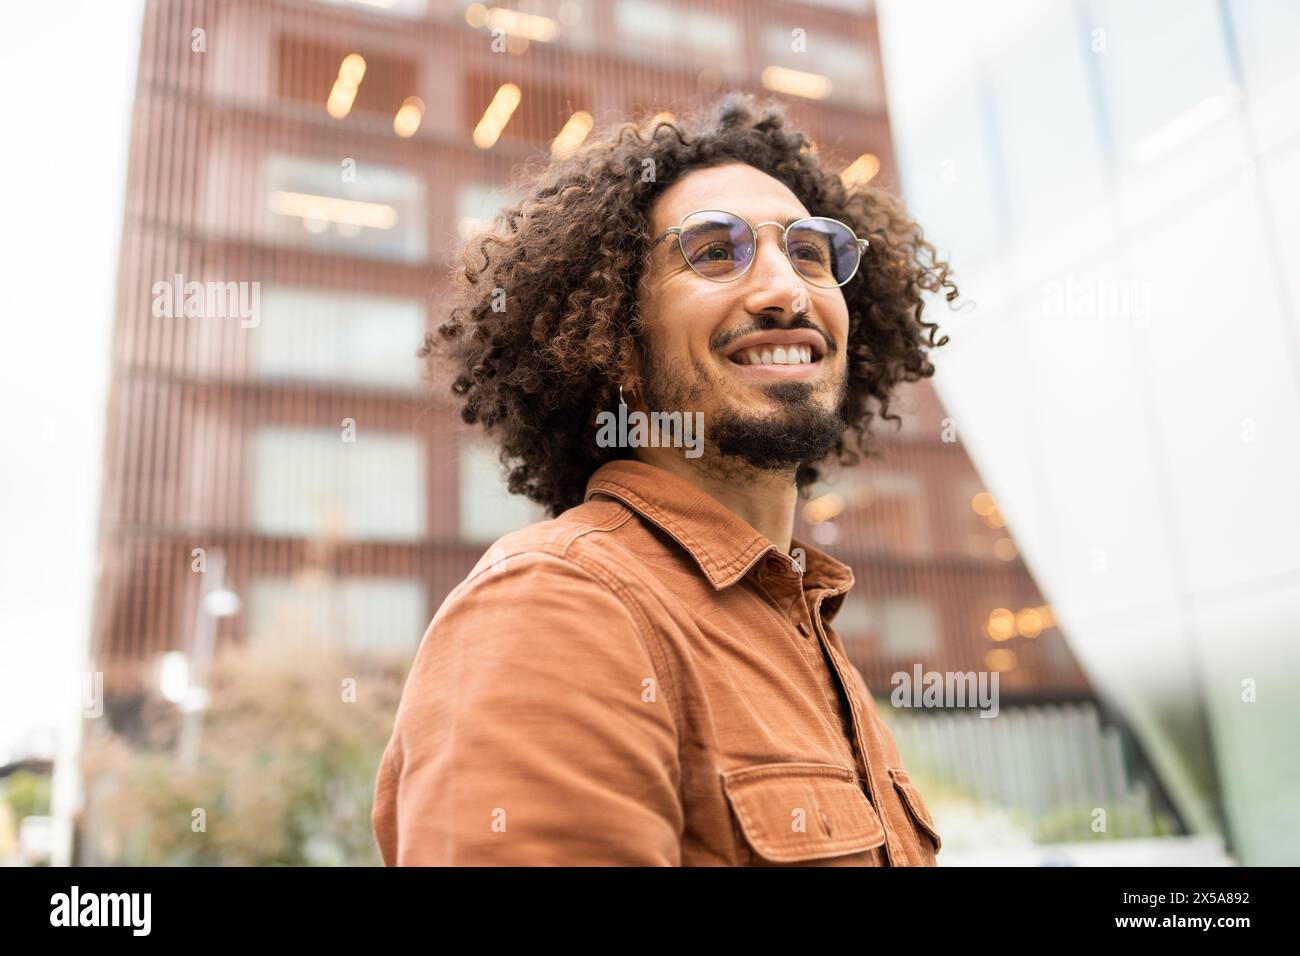 Joyful young man with curly hair rides an electric scooter through an urban area, expressing freedom and happiness against a modern building backdrop Stock Photo